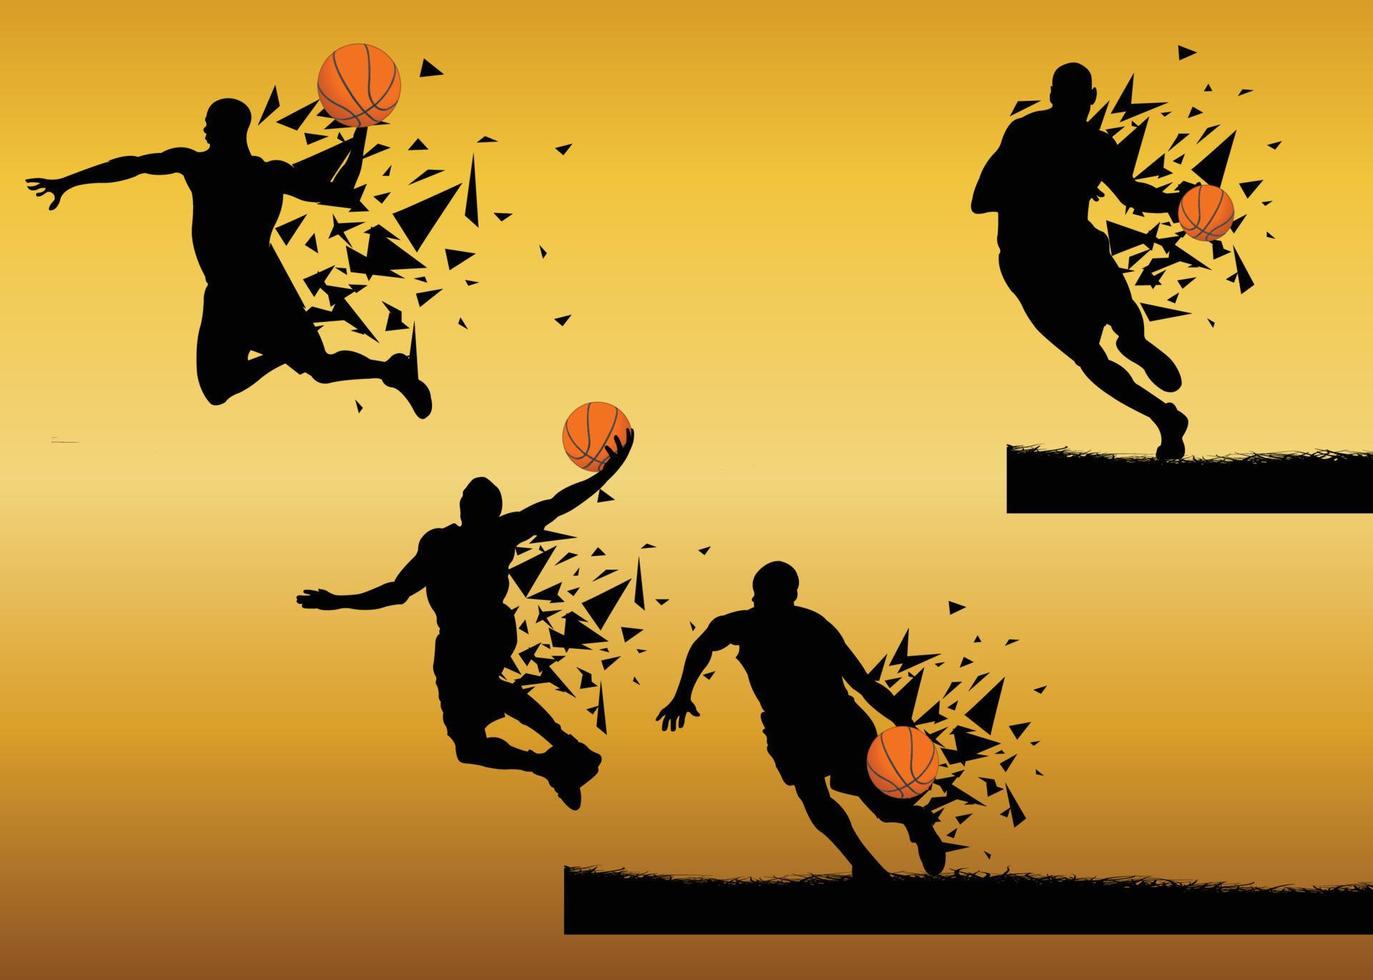 Basketball player icons silhouette explosive design vector